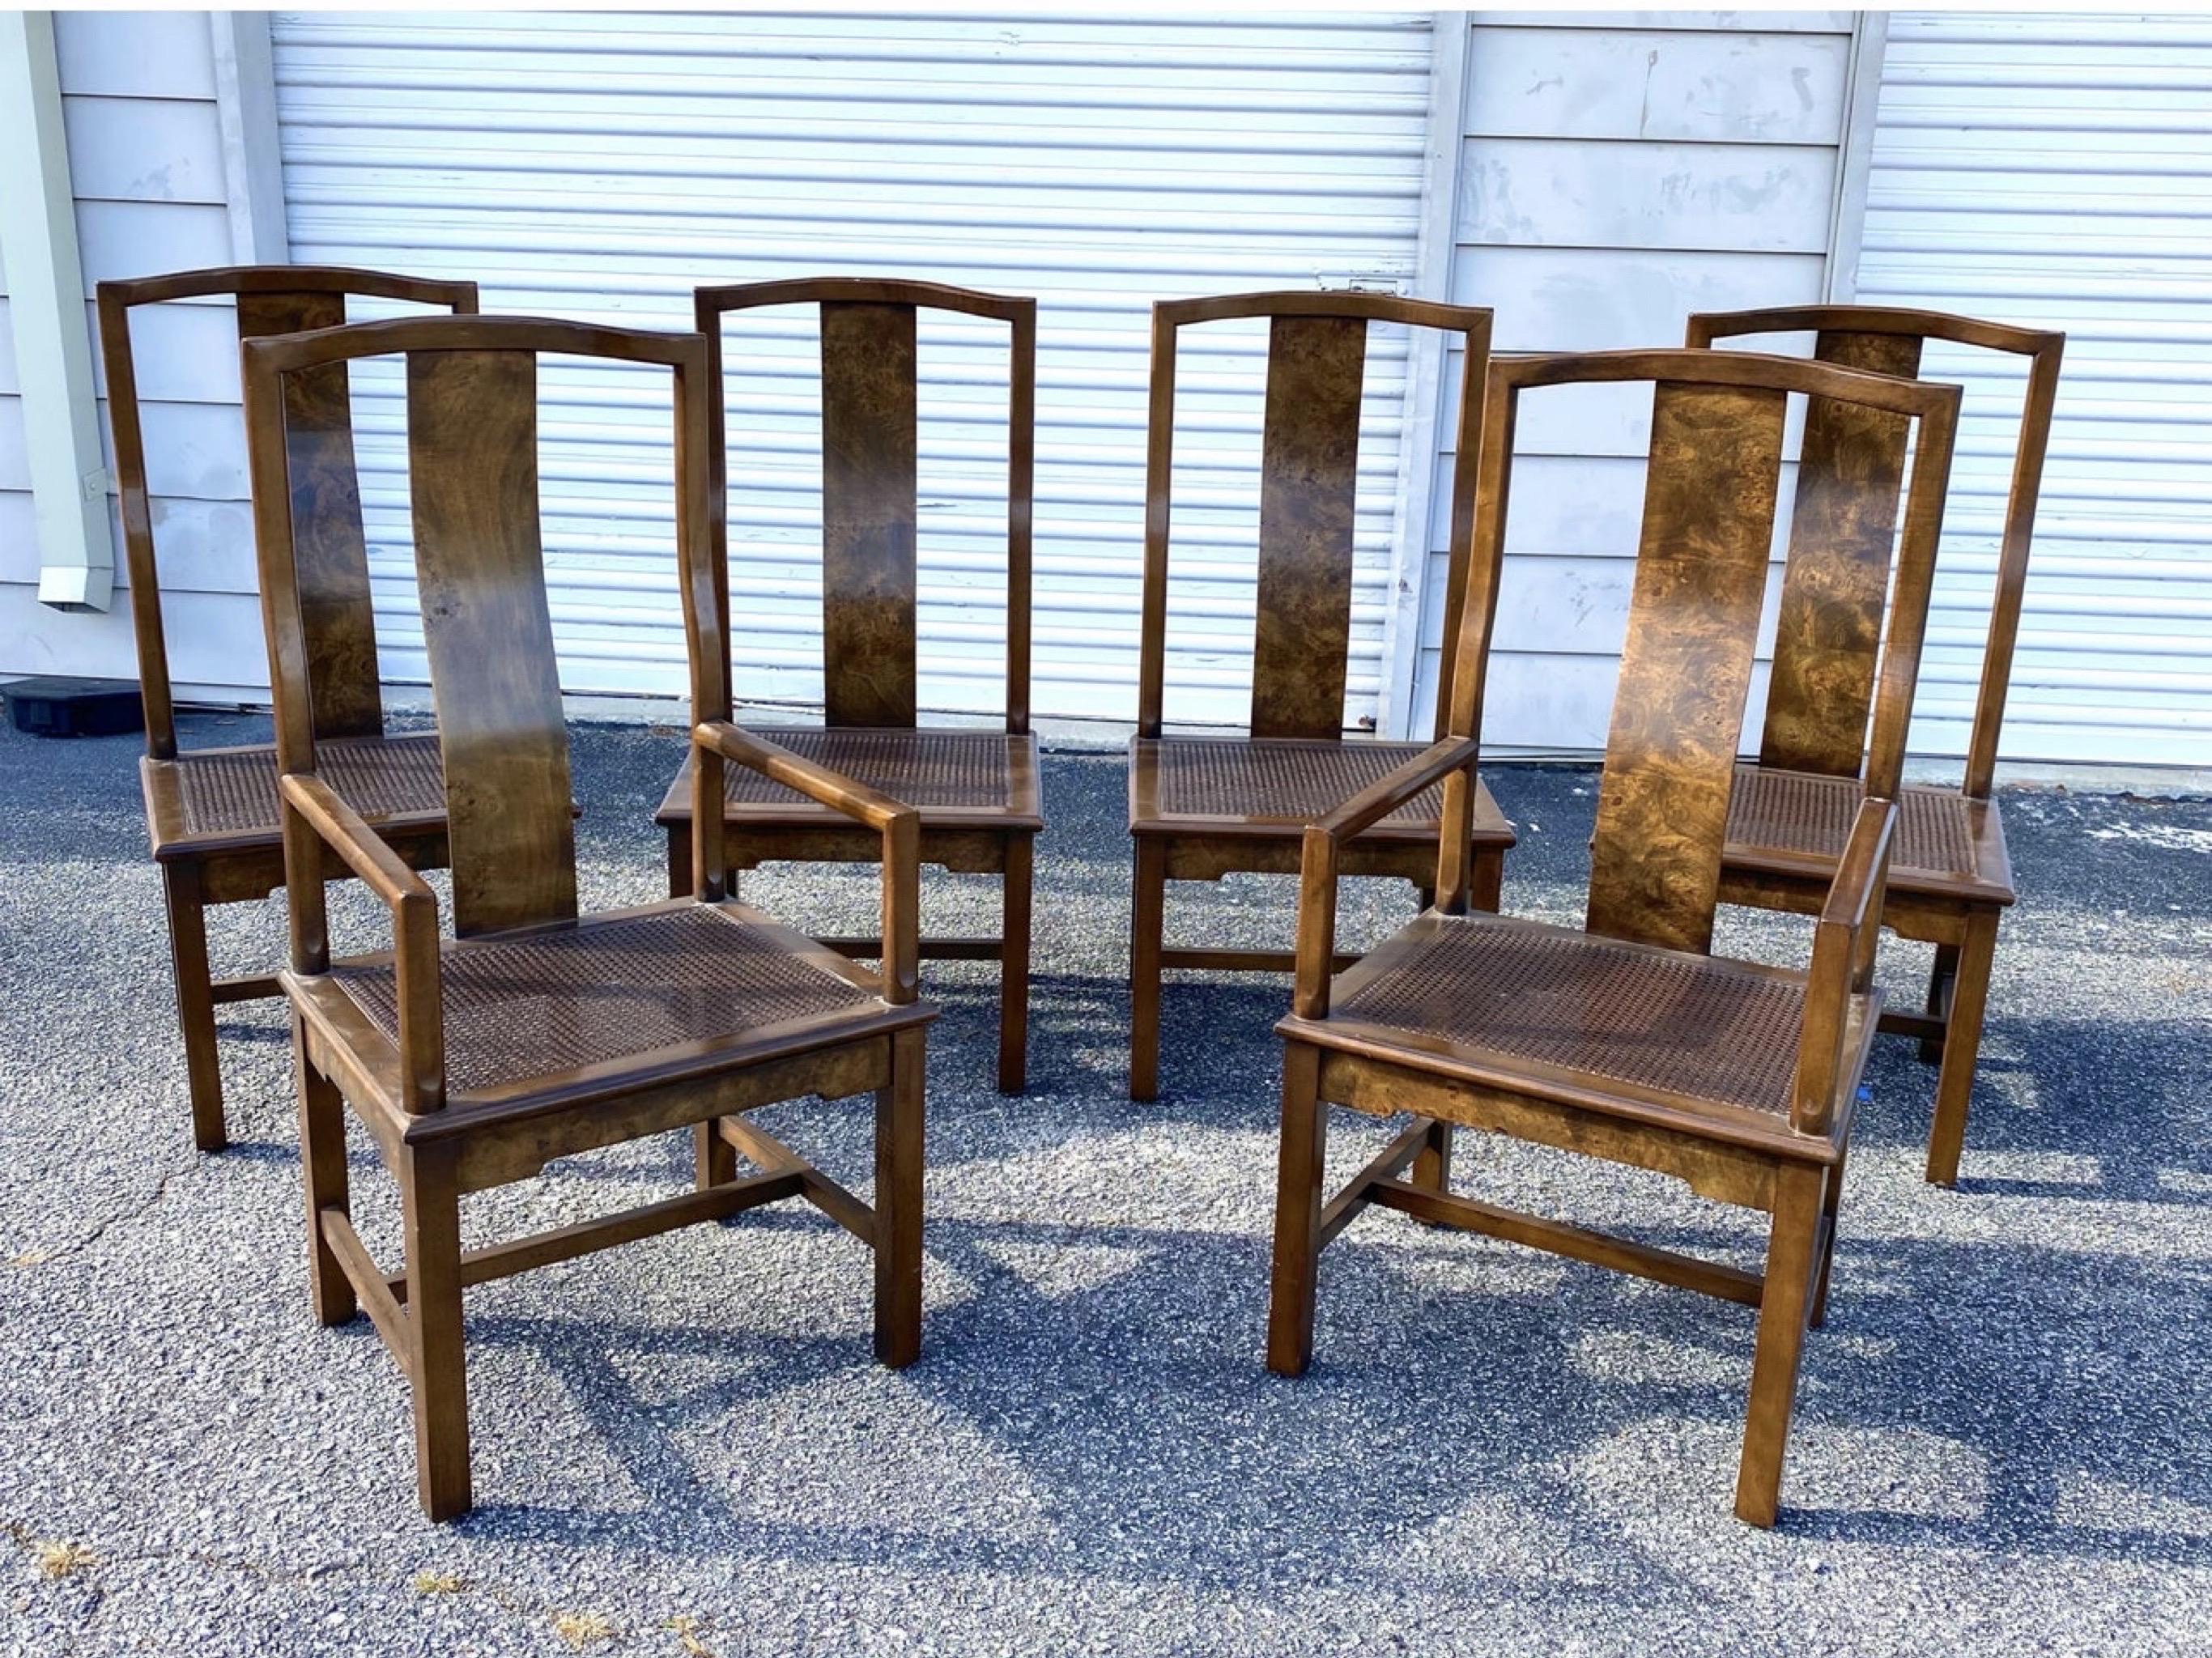 This absolutely stunning set of 6 Asian modern yolk style dining chairs have sexy curved backs with a burl finish and a burl apron adorning all the chair’s seats. Cane seats are all in very good condition with no breaks in the cane. The frames are